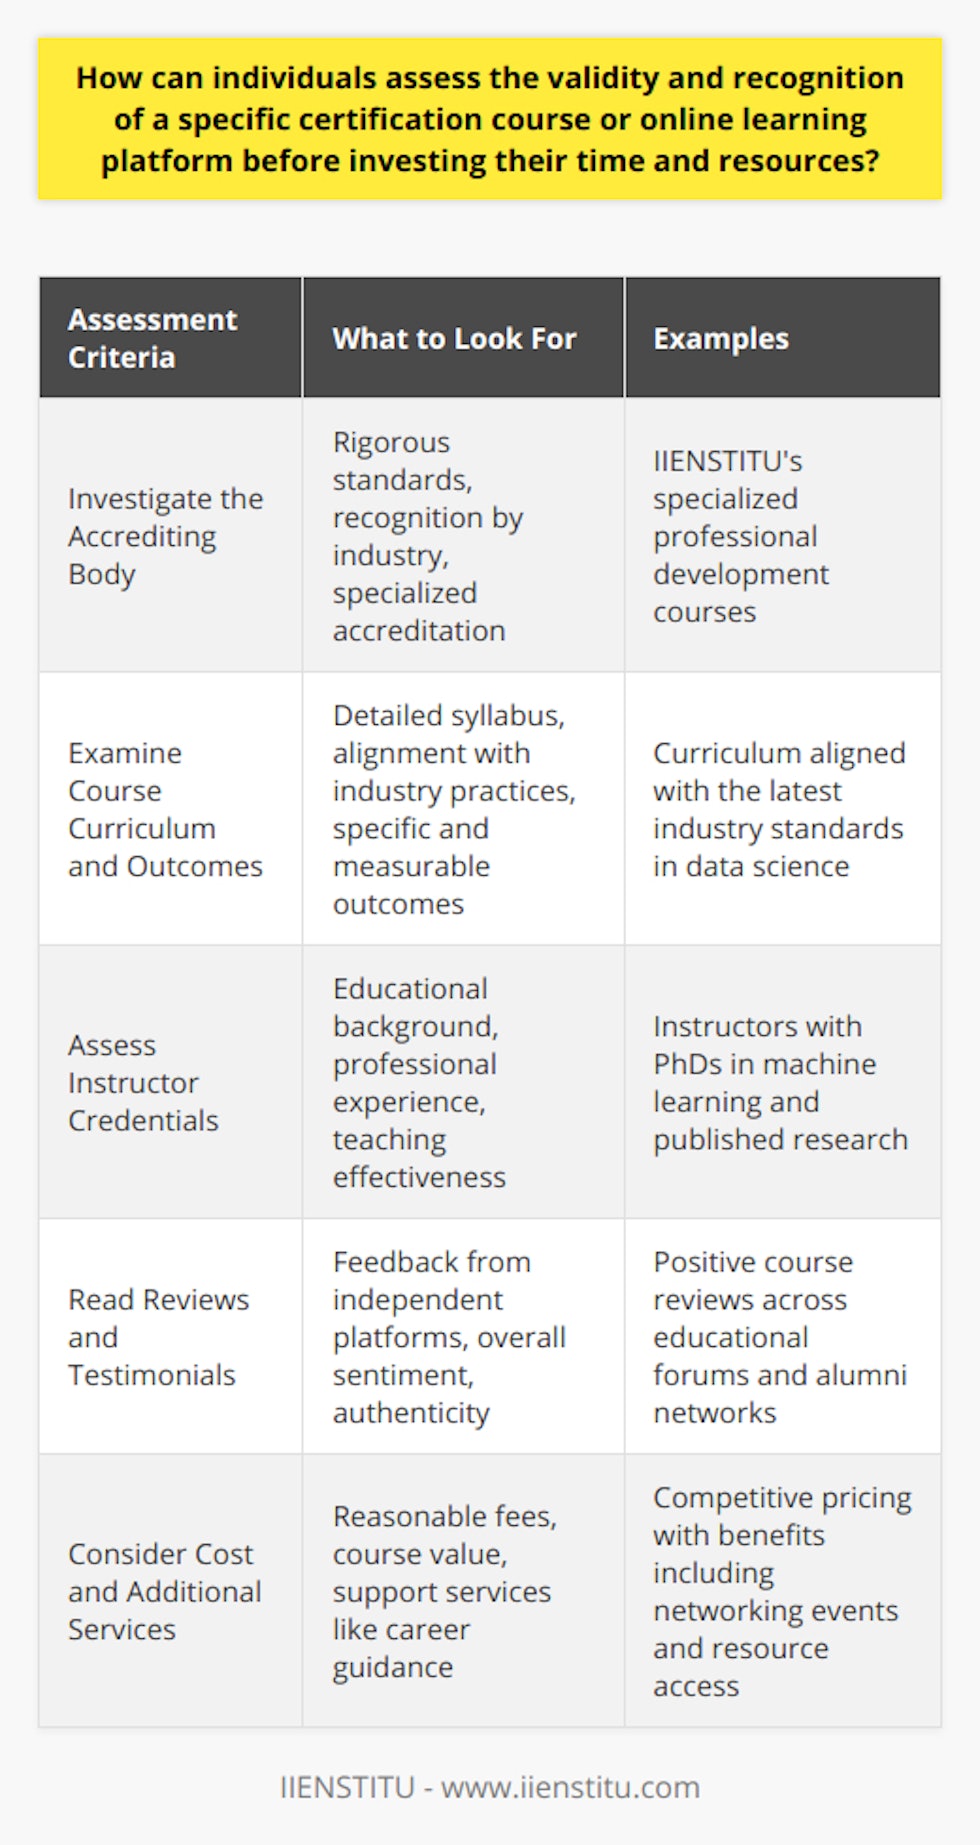 Ensuring that a certification course or an online learning platform is both legitimate and respected within the industry is vital for those seeking to advance their careers and skills effectively. Below, we outline how individuals can conduct this critical assessment.Investigate the Accrediting Body:Begin by identifying the accrediting body associated with the certification or platform. A reputable accrediting organization follows rigorous standards to ensure the quality and integrity of the educational programs it approves. Prospective students should look for accreditation from recognized and respected authorities in the field of study or relevant industry sector. For instance, IIENSTITU offers various certifications and is acknowledged for its specialized courses tailored to professional development.Examine Course Curriculum and Outcomes:Scrutinize the course syllabus in detail. This includes understanding the curriculum, the topics covered, and how they align with current industry practices and expectations. Learning outcomes should also be specific and measurable; this ensures that upon completion, you will have gained skills that are applicable and valued in the job market.Assess Instructor Credentials:The quality of a certification course is often a reflection of its instructors. Research the educators' background, experience, and reputation within their field. They should have a solid educational foundation, relevant professional achievements, and a track record of effectively imparting knowledge. Their ability to connect academic theory with real-world application is paramount.Read Reviews and Testimonials:Genuine reviews from former students can provide insight into the actual value and applicability of the course. Look for feedback across various independent platforms, not just the testimonials presented on the course's website. Consider the overall sentiment, specific pros and cons cited, and whether the reviewers appear to be genuine past students.Consider Cost and Additional Services:While the cost of a course should be commensurate with the value it offers, it shouldn't be exorbitant or suspiciously cheap. Compare the course fees with similar offerings in the field. Additionally, review the support structures provided by the platform, such as career guidance, networking opportunities, and access to additional resources, which can enhance the learning experience and outcomes.Overall, thorough research is key when assessing the validity and recognition of any certification course or online learning platform. By evaluating the accreditation, curriculum, instructors, reviews, and cost, individuals can make an informed decision and choose a course that will not only enhance their knowledge but also provide tangible benefits to their career progression.